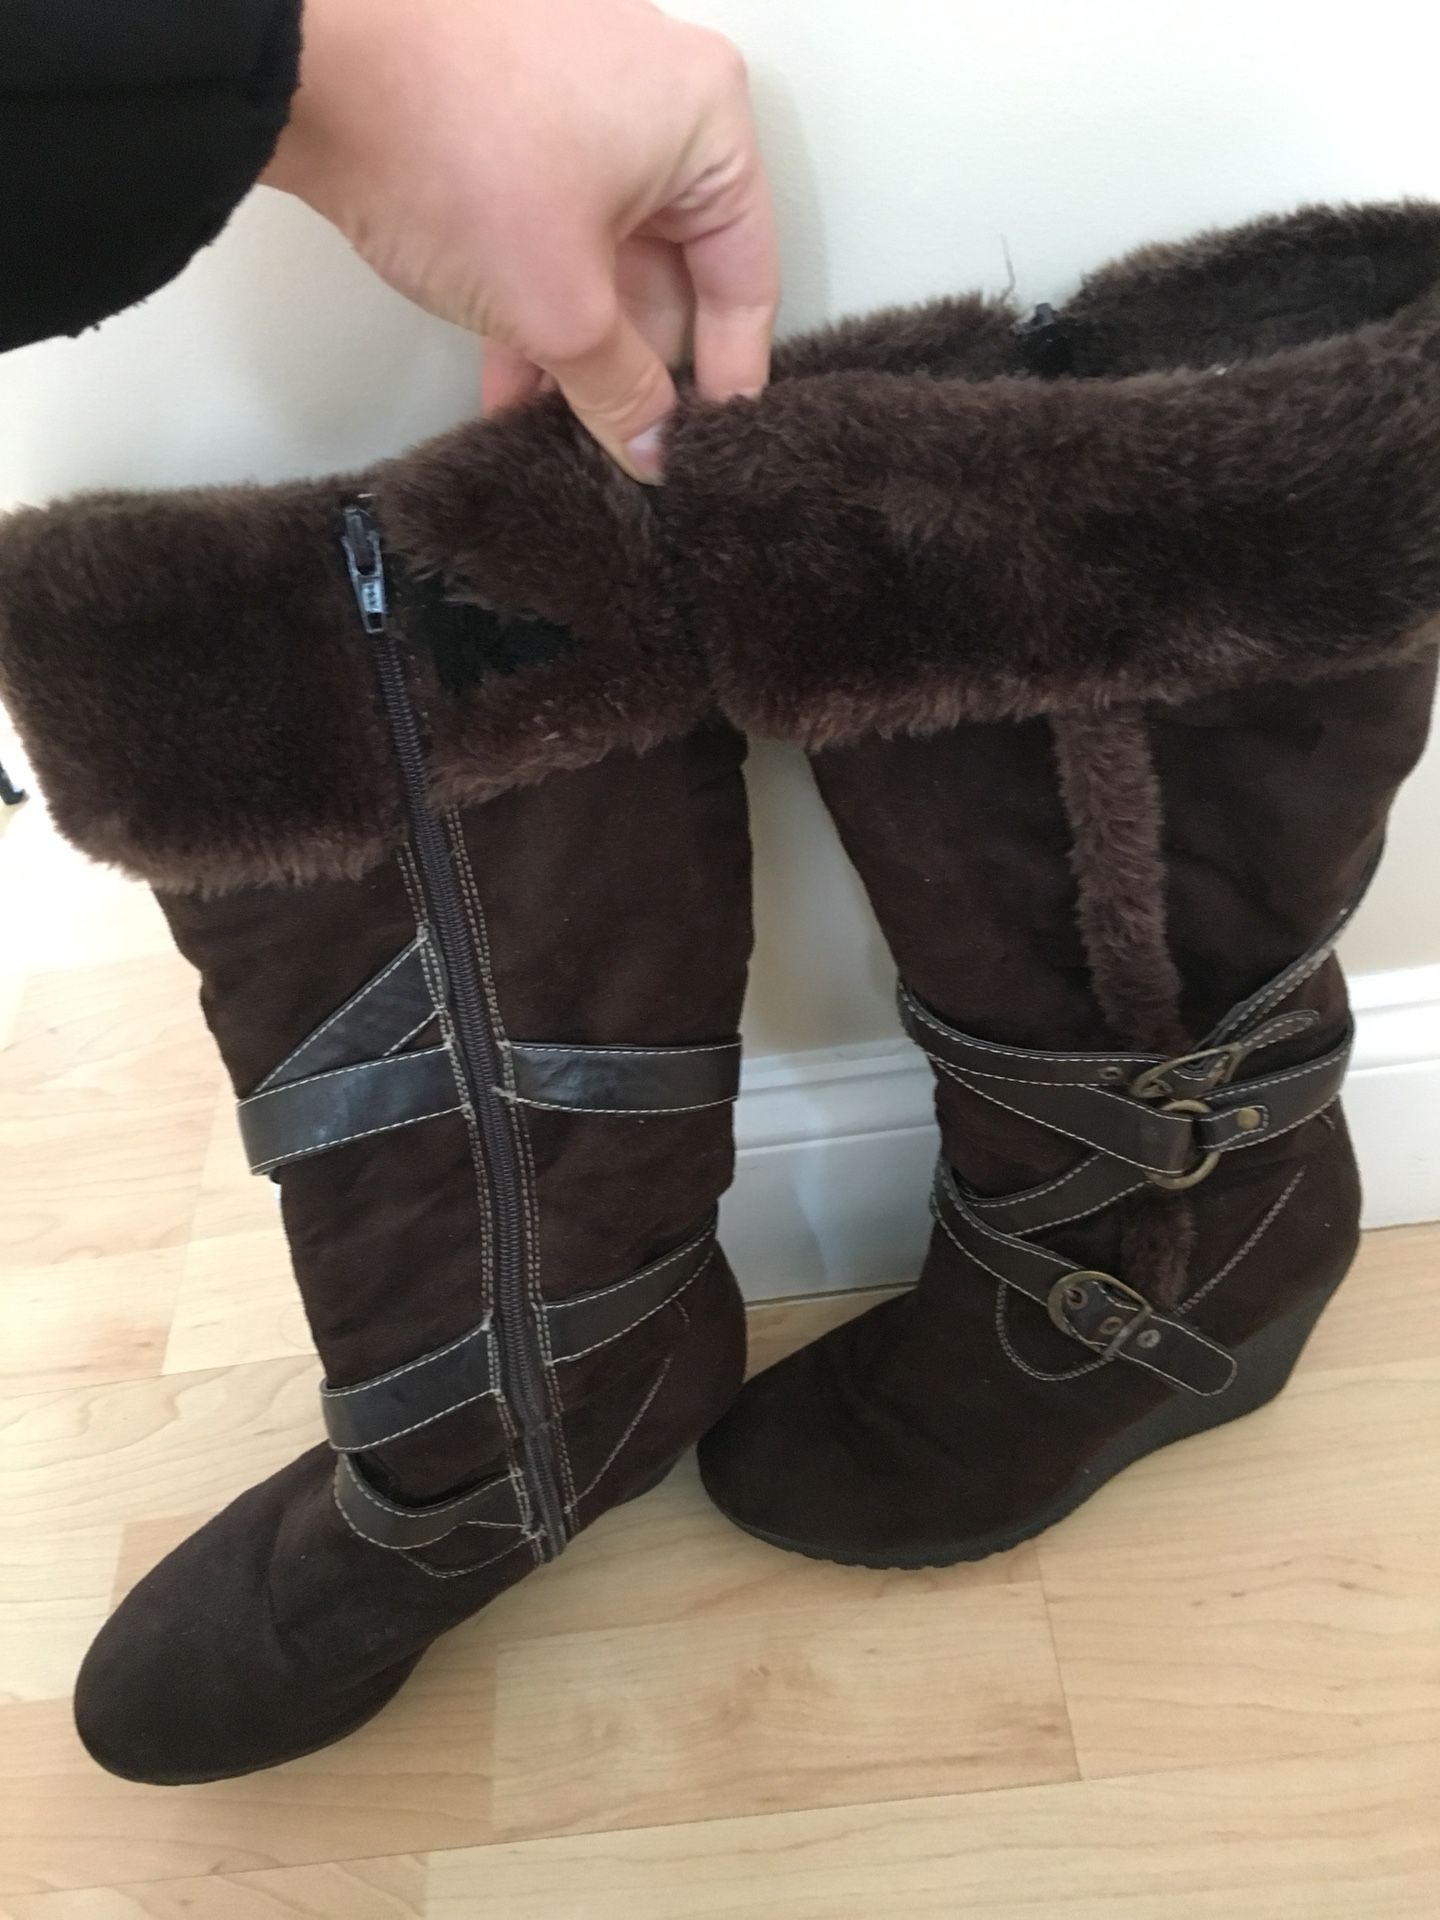 Brown boot, size 8 women’s